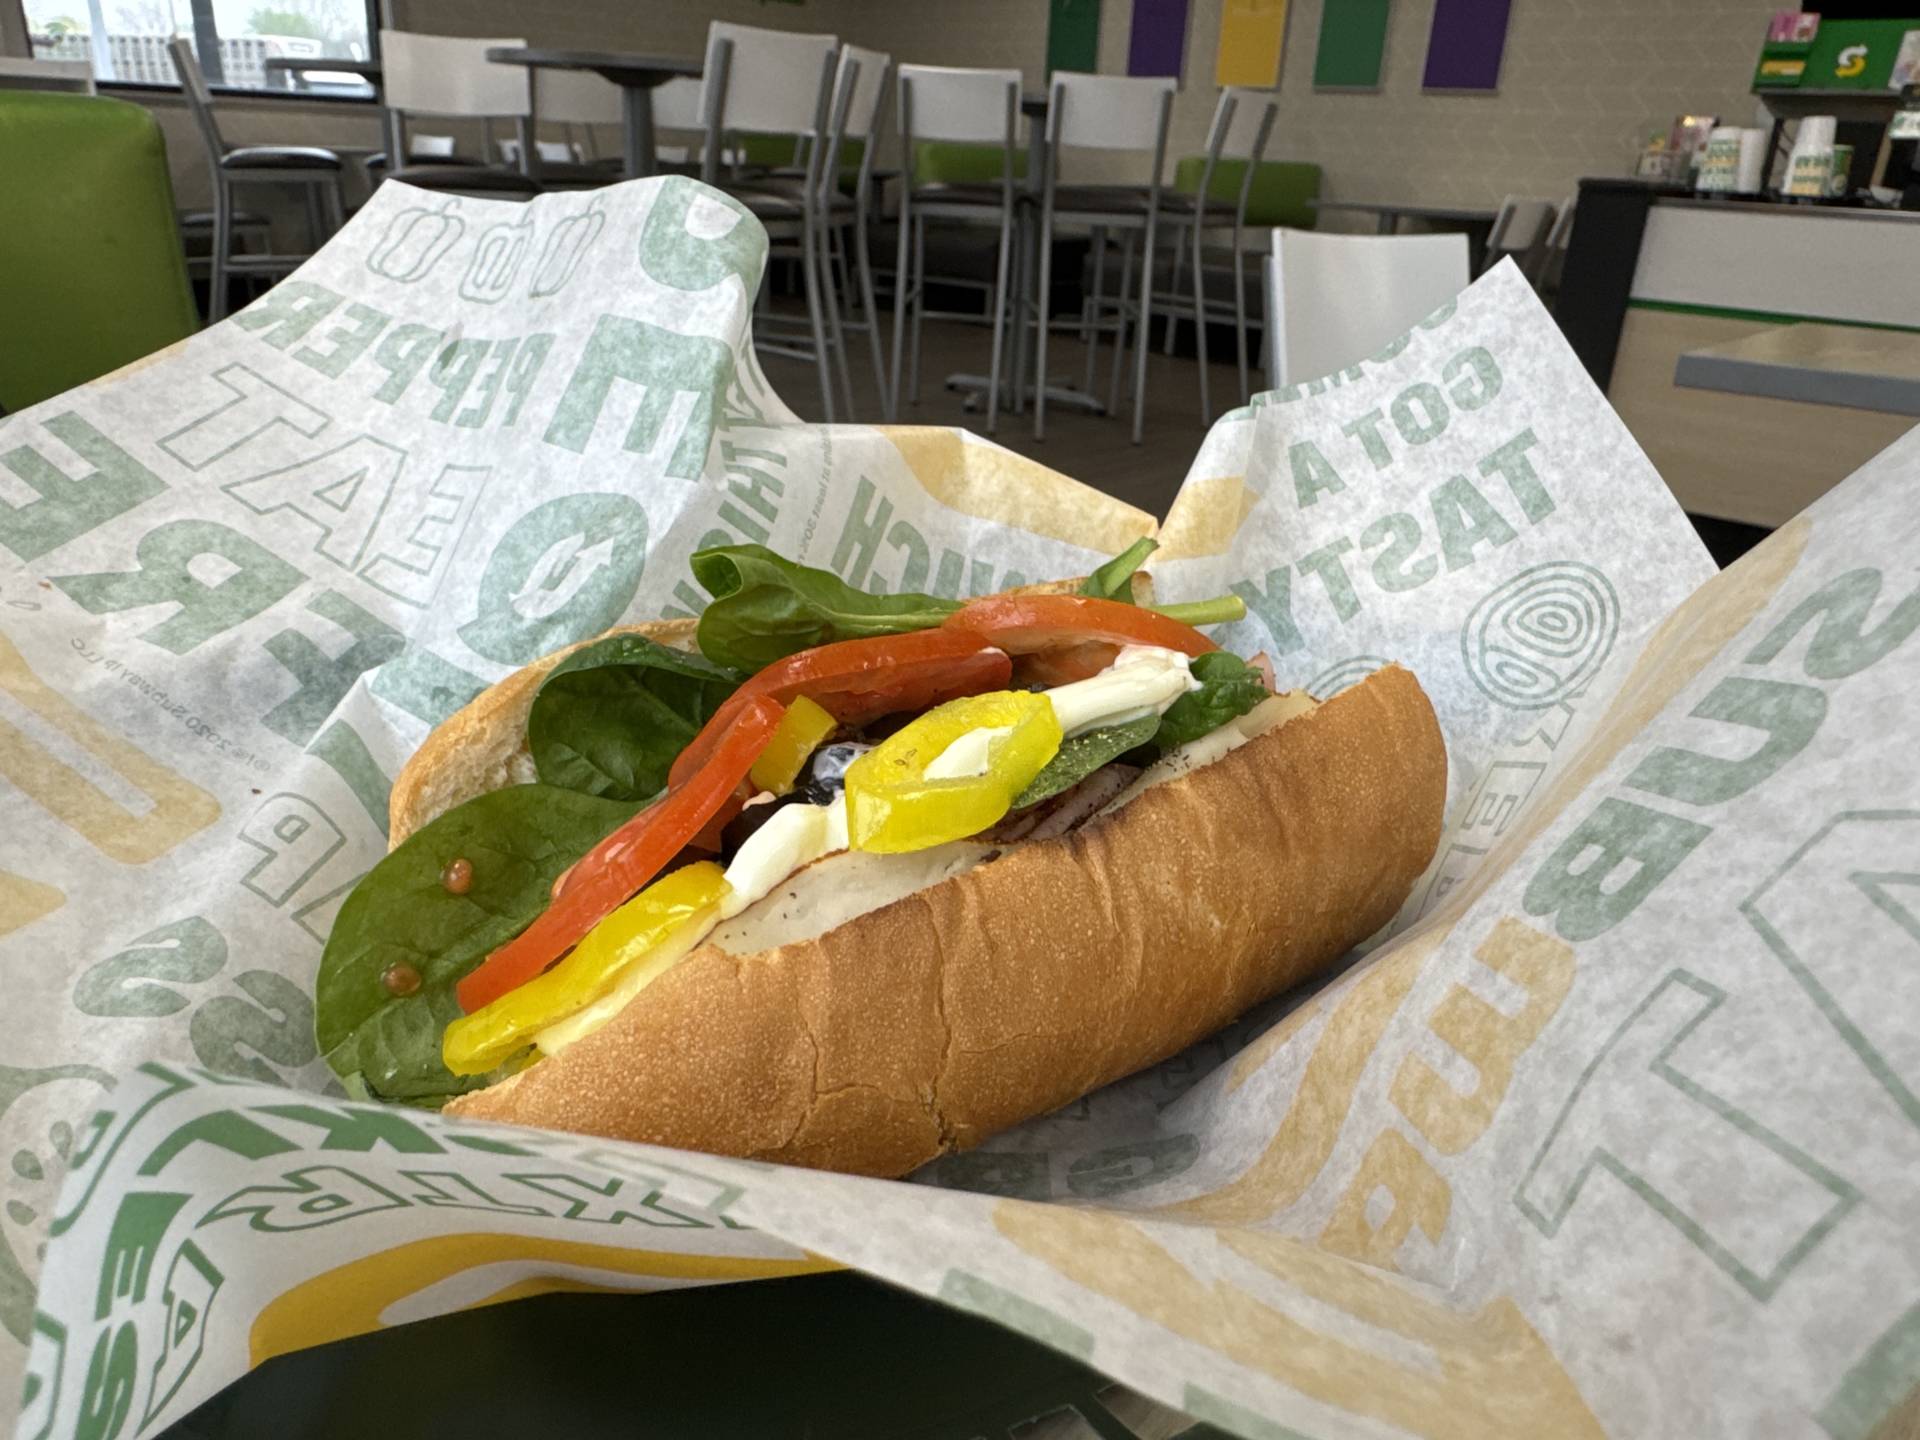 Subway for lunch. Finally something other than a burger! Central City, NE 11:21 AM